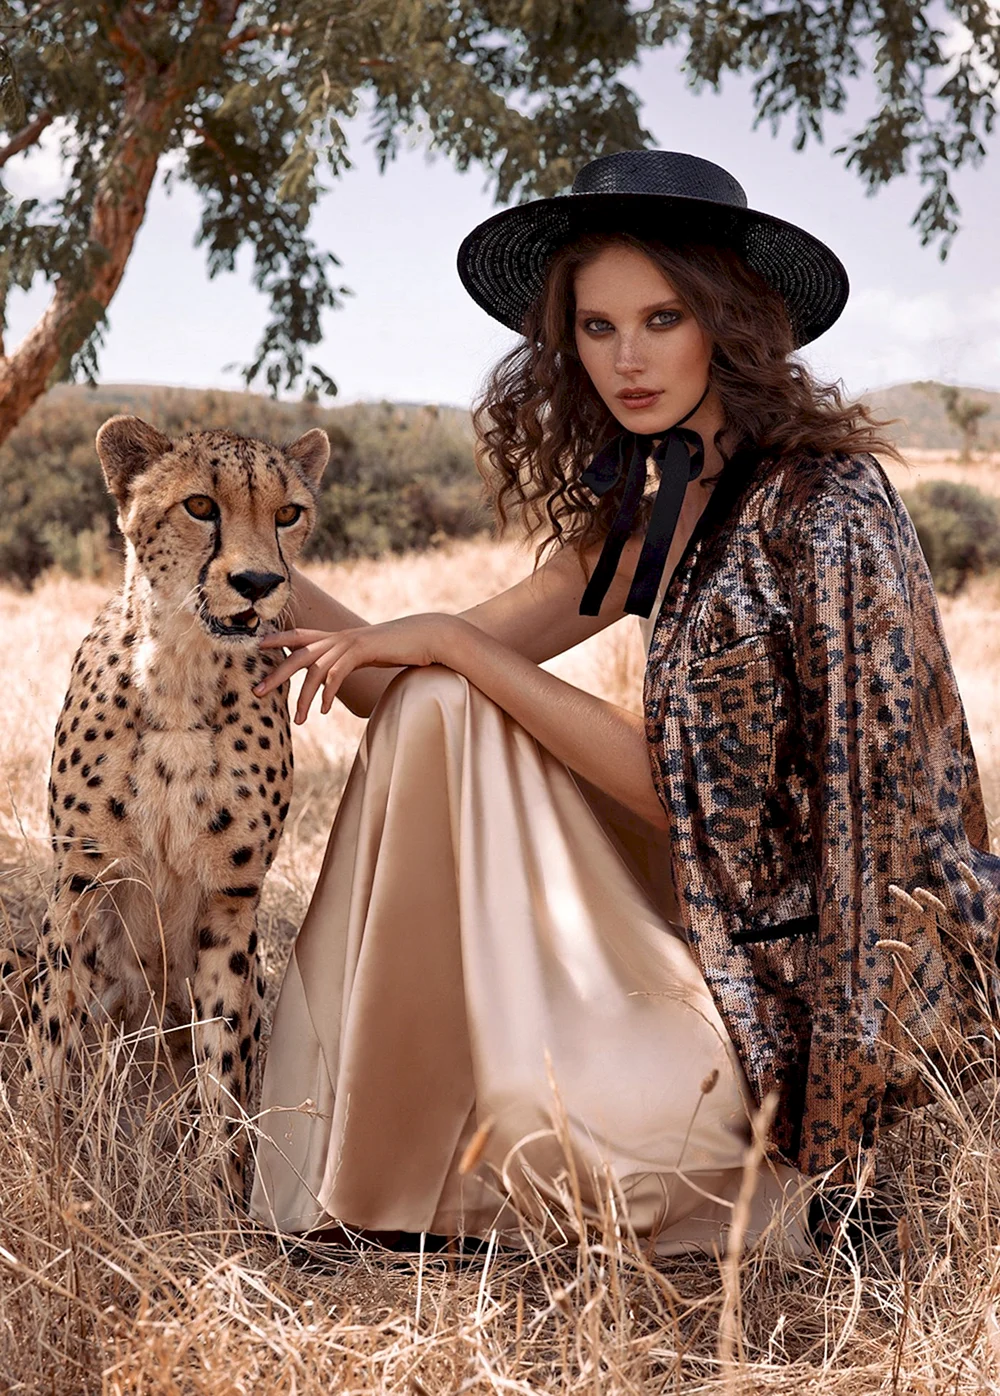 Photoshoot with Leopard